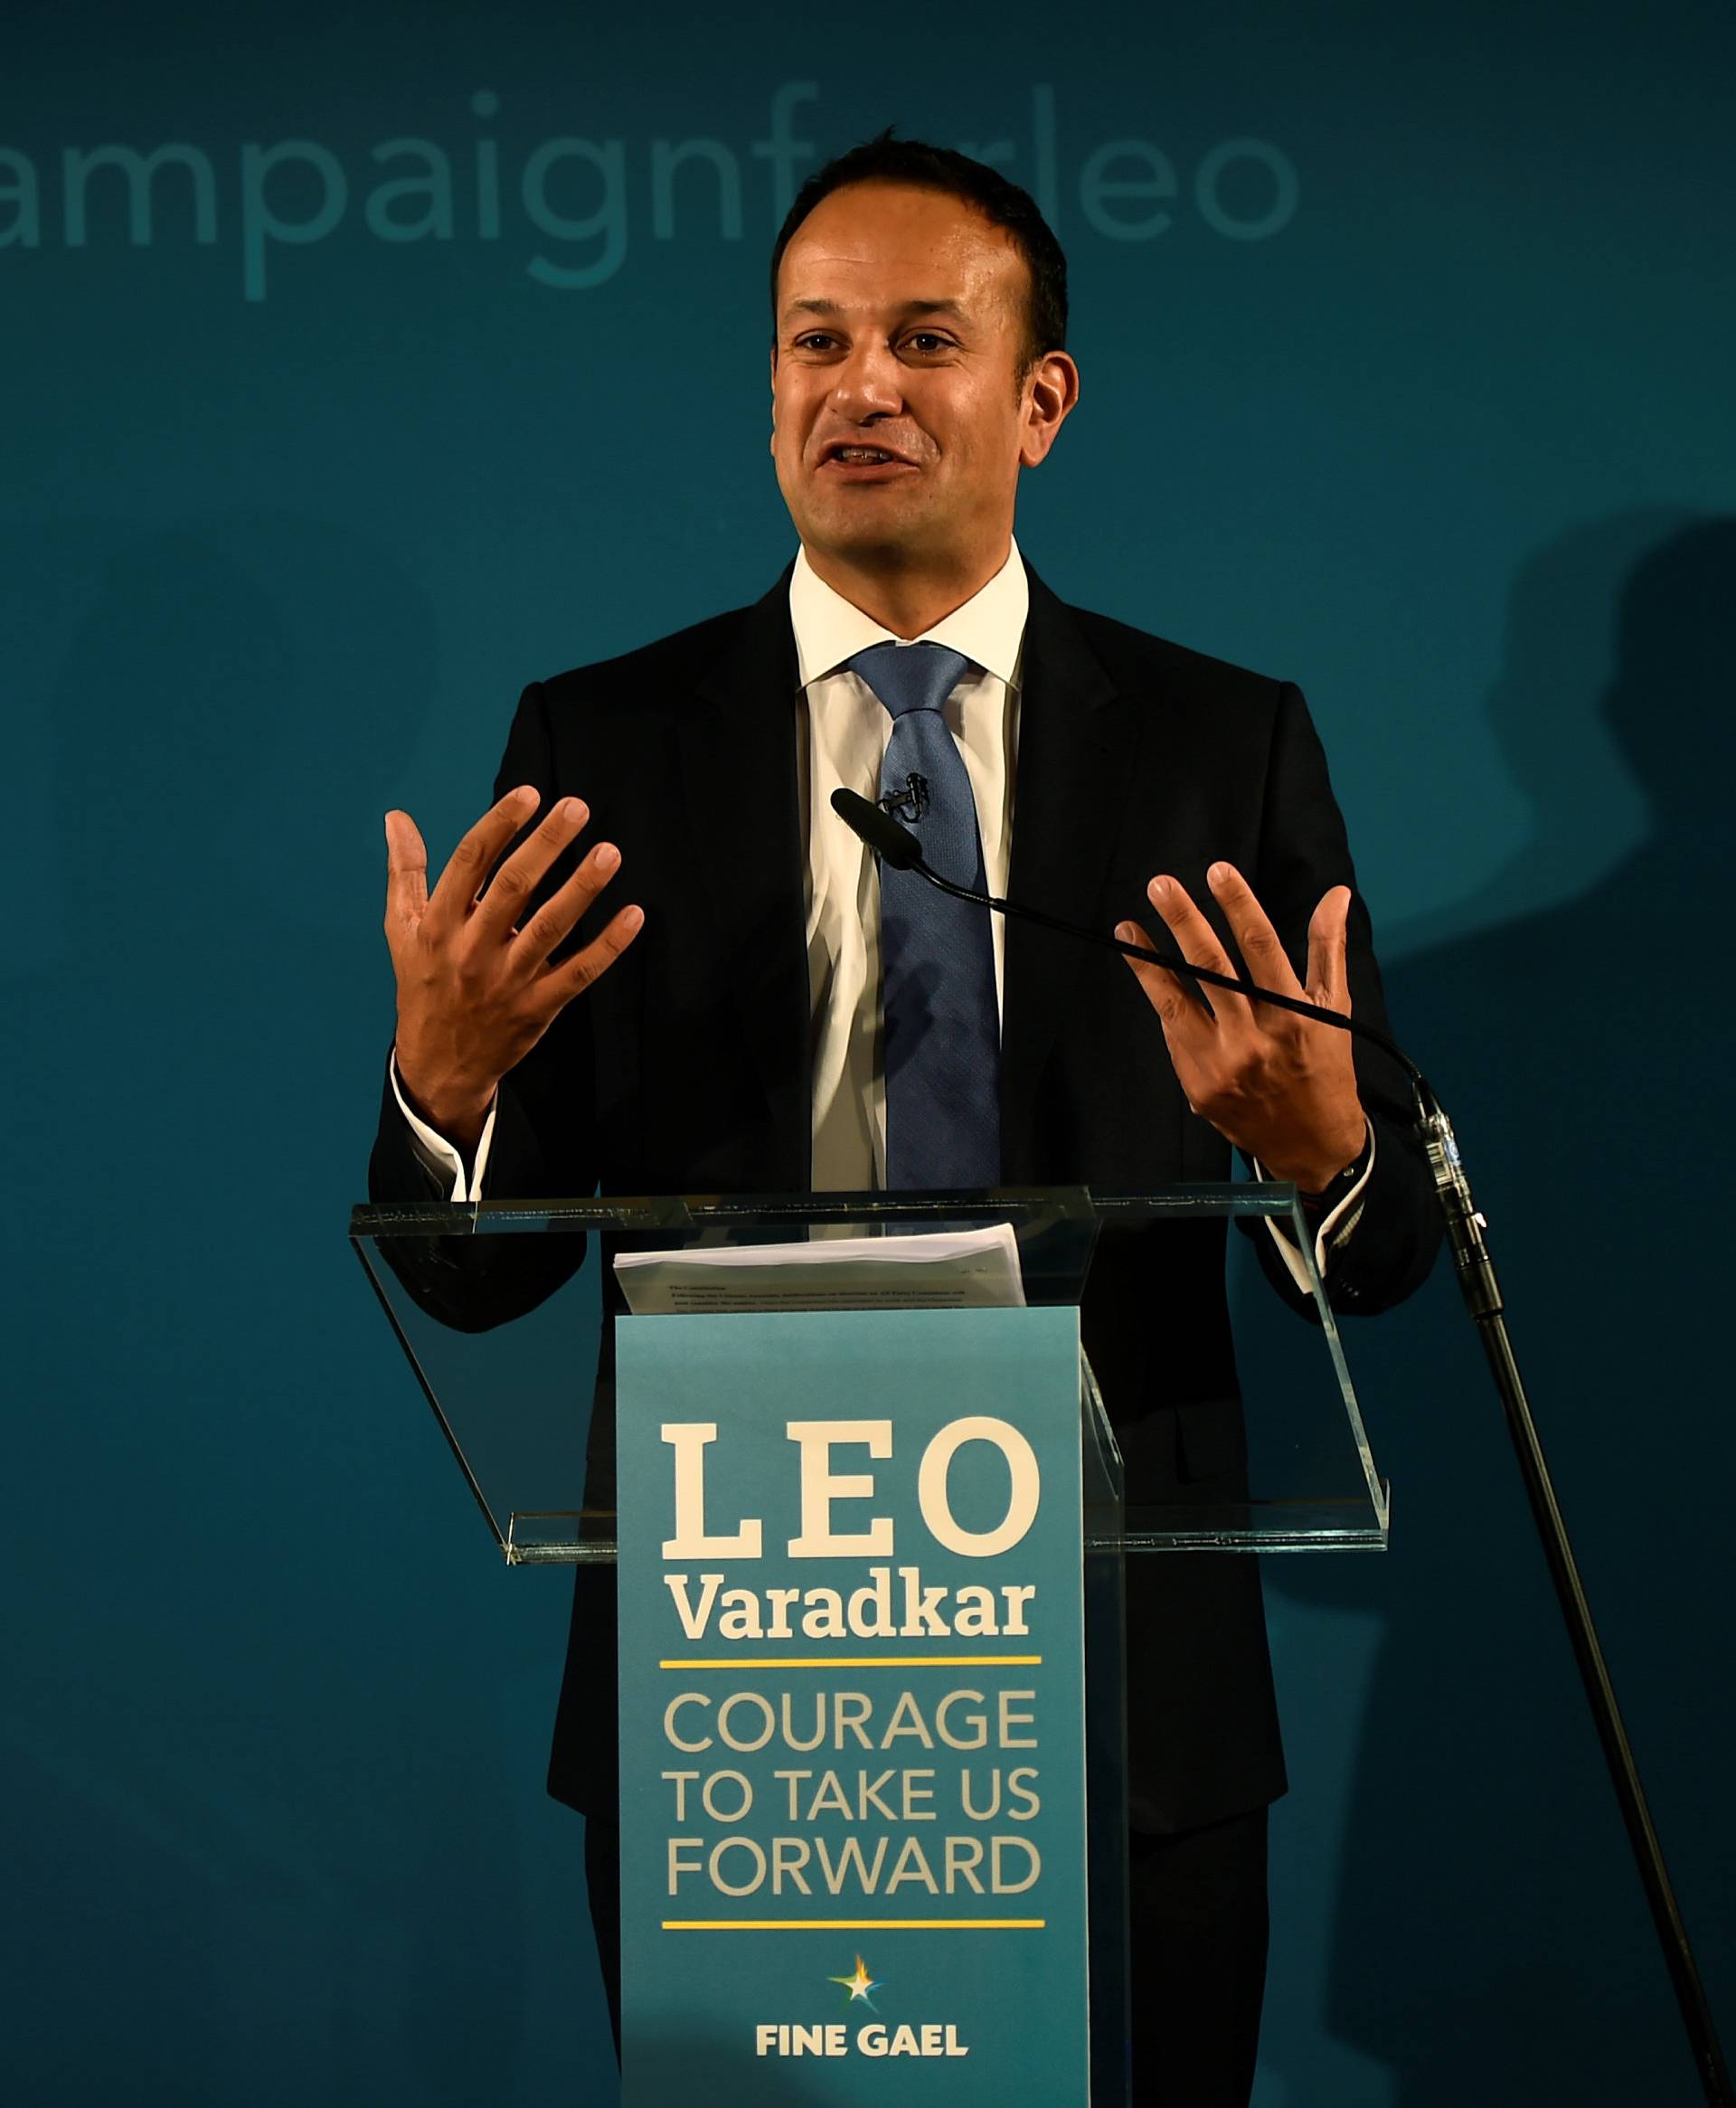 Ireland's Minister for Social Protection Leo Varadkar launches his campaign bid for Fine Gael party leader in Dublin